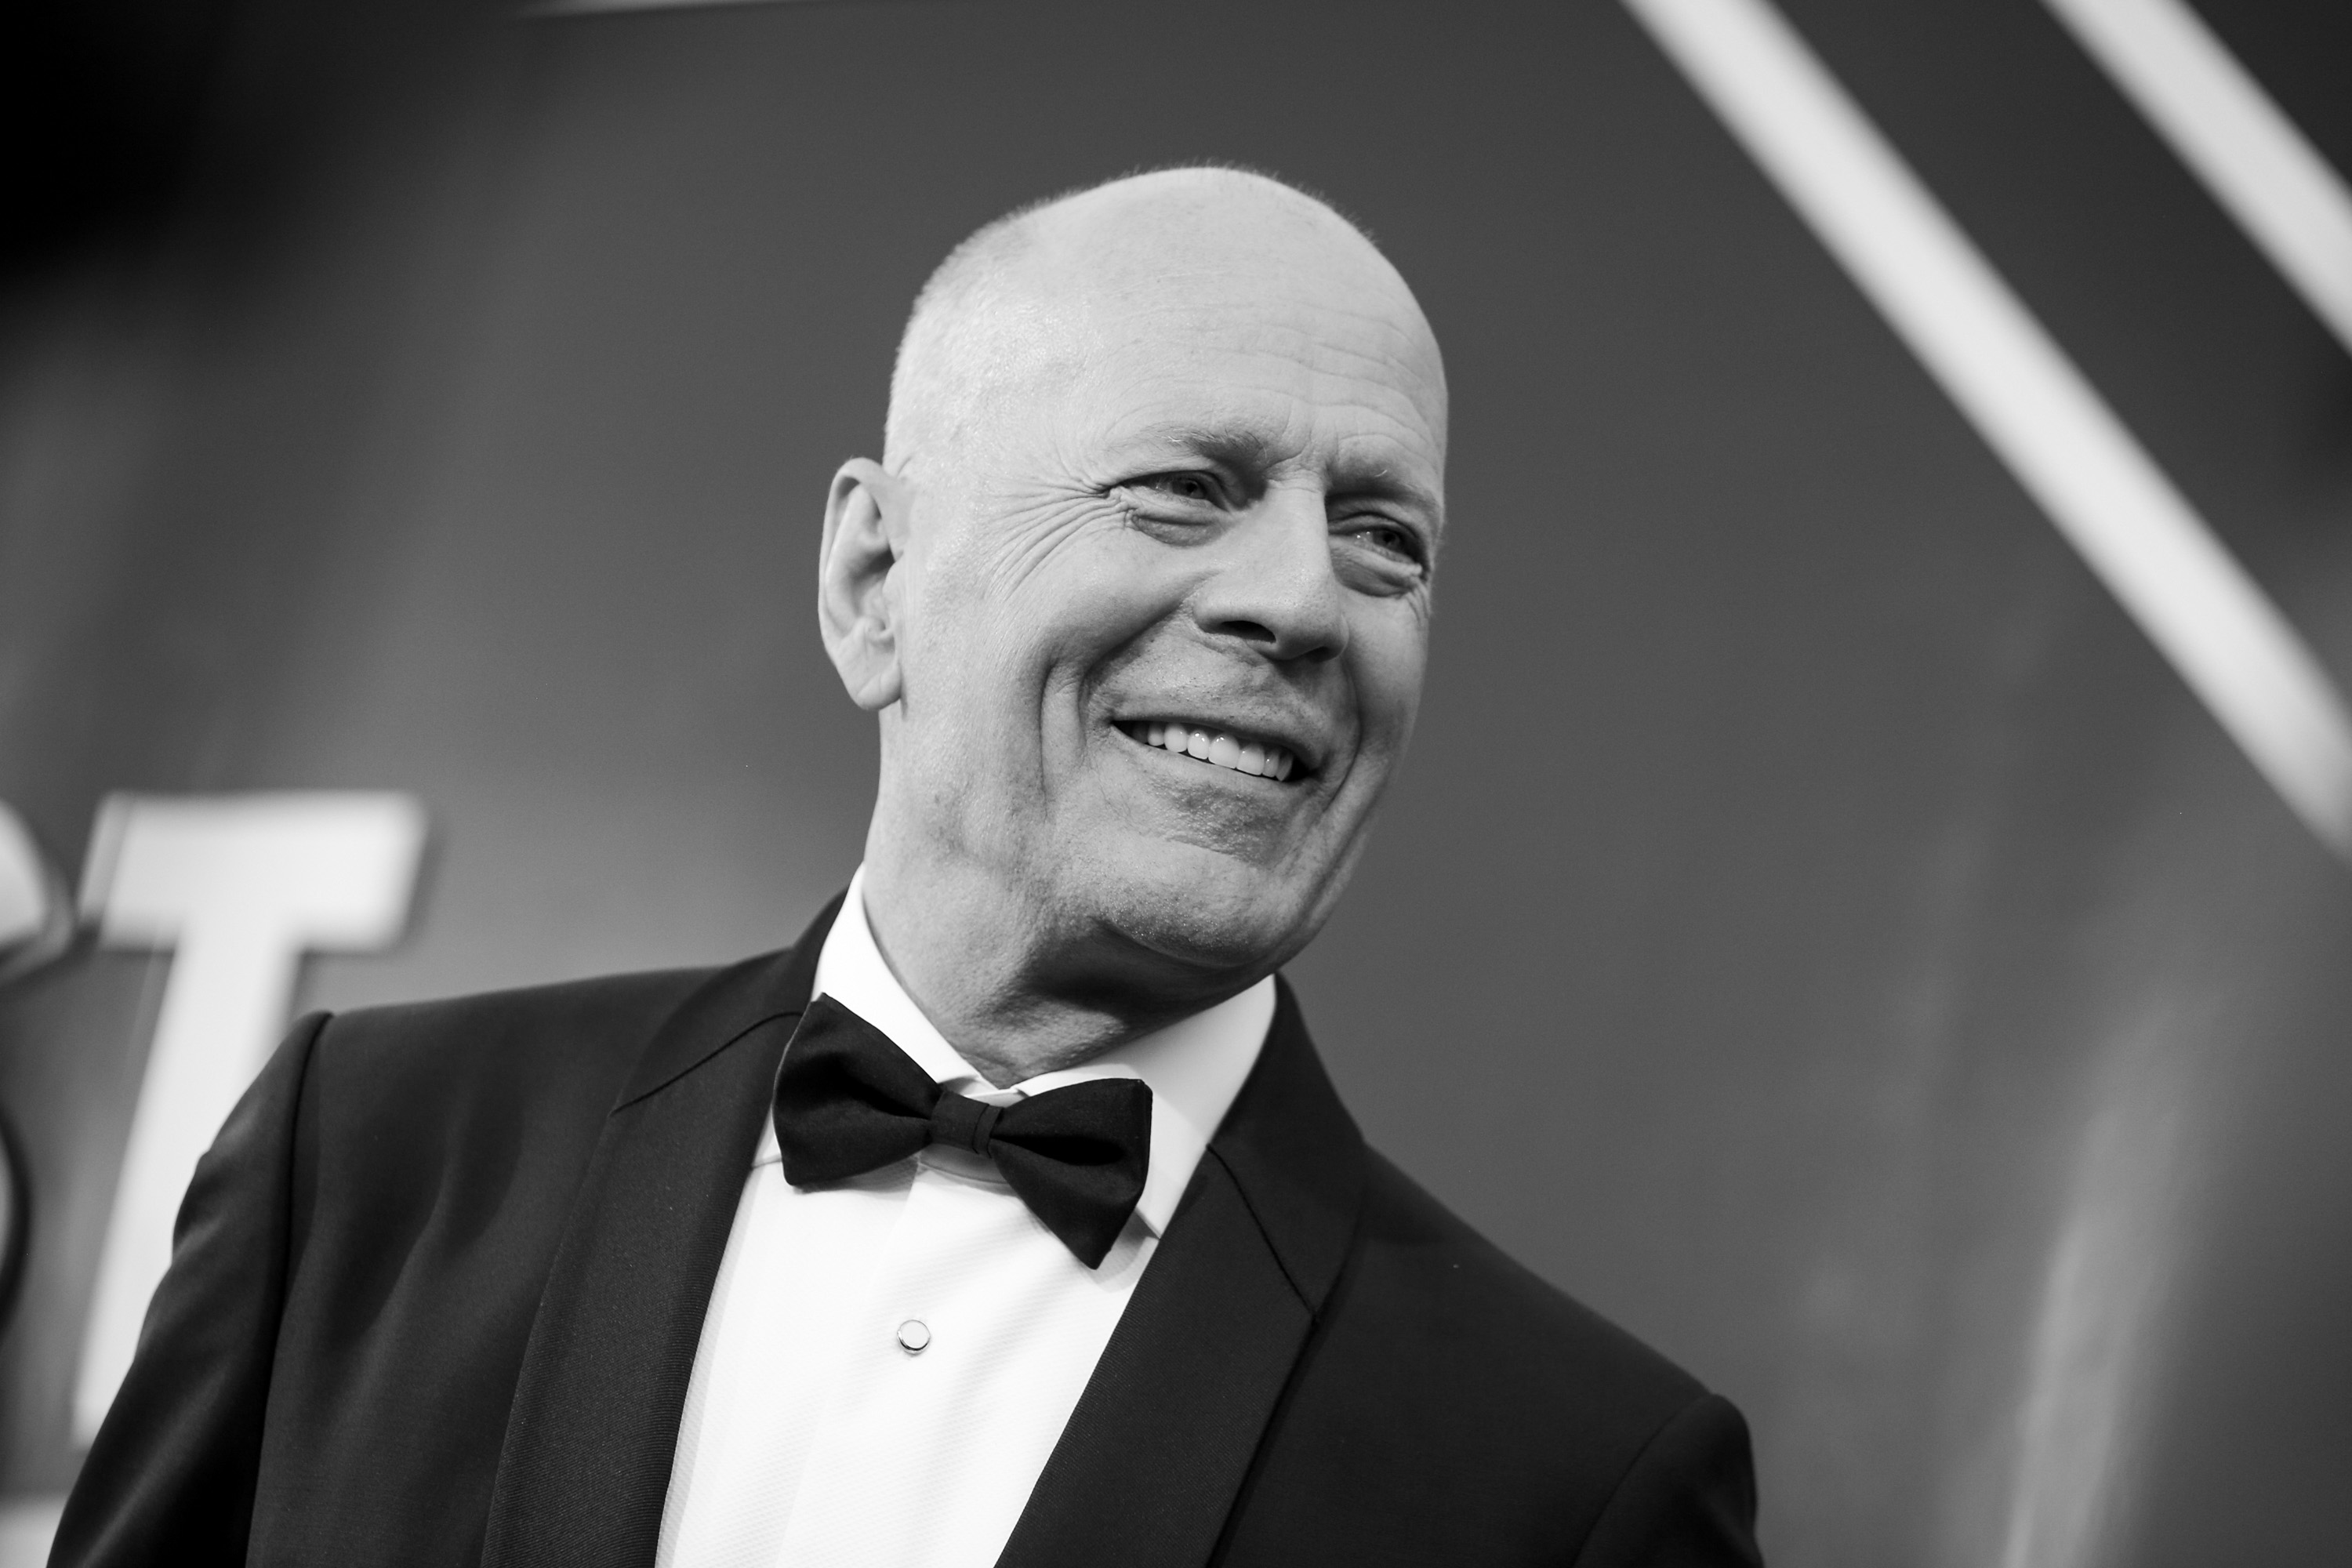 Bruce Willis attends the Comedy Central Roast of Bruce Willis at Hollywood Palladium on July 14, 2018 in Los Angeles. (Rich Fury/Getty Images)